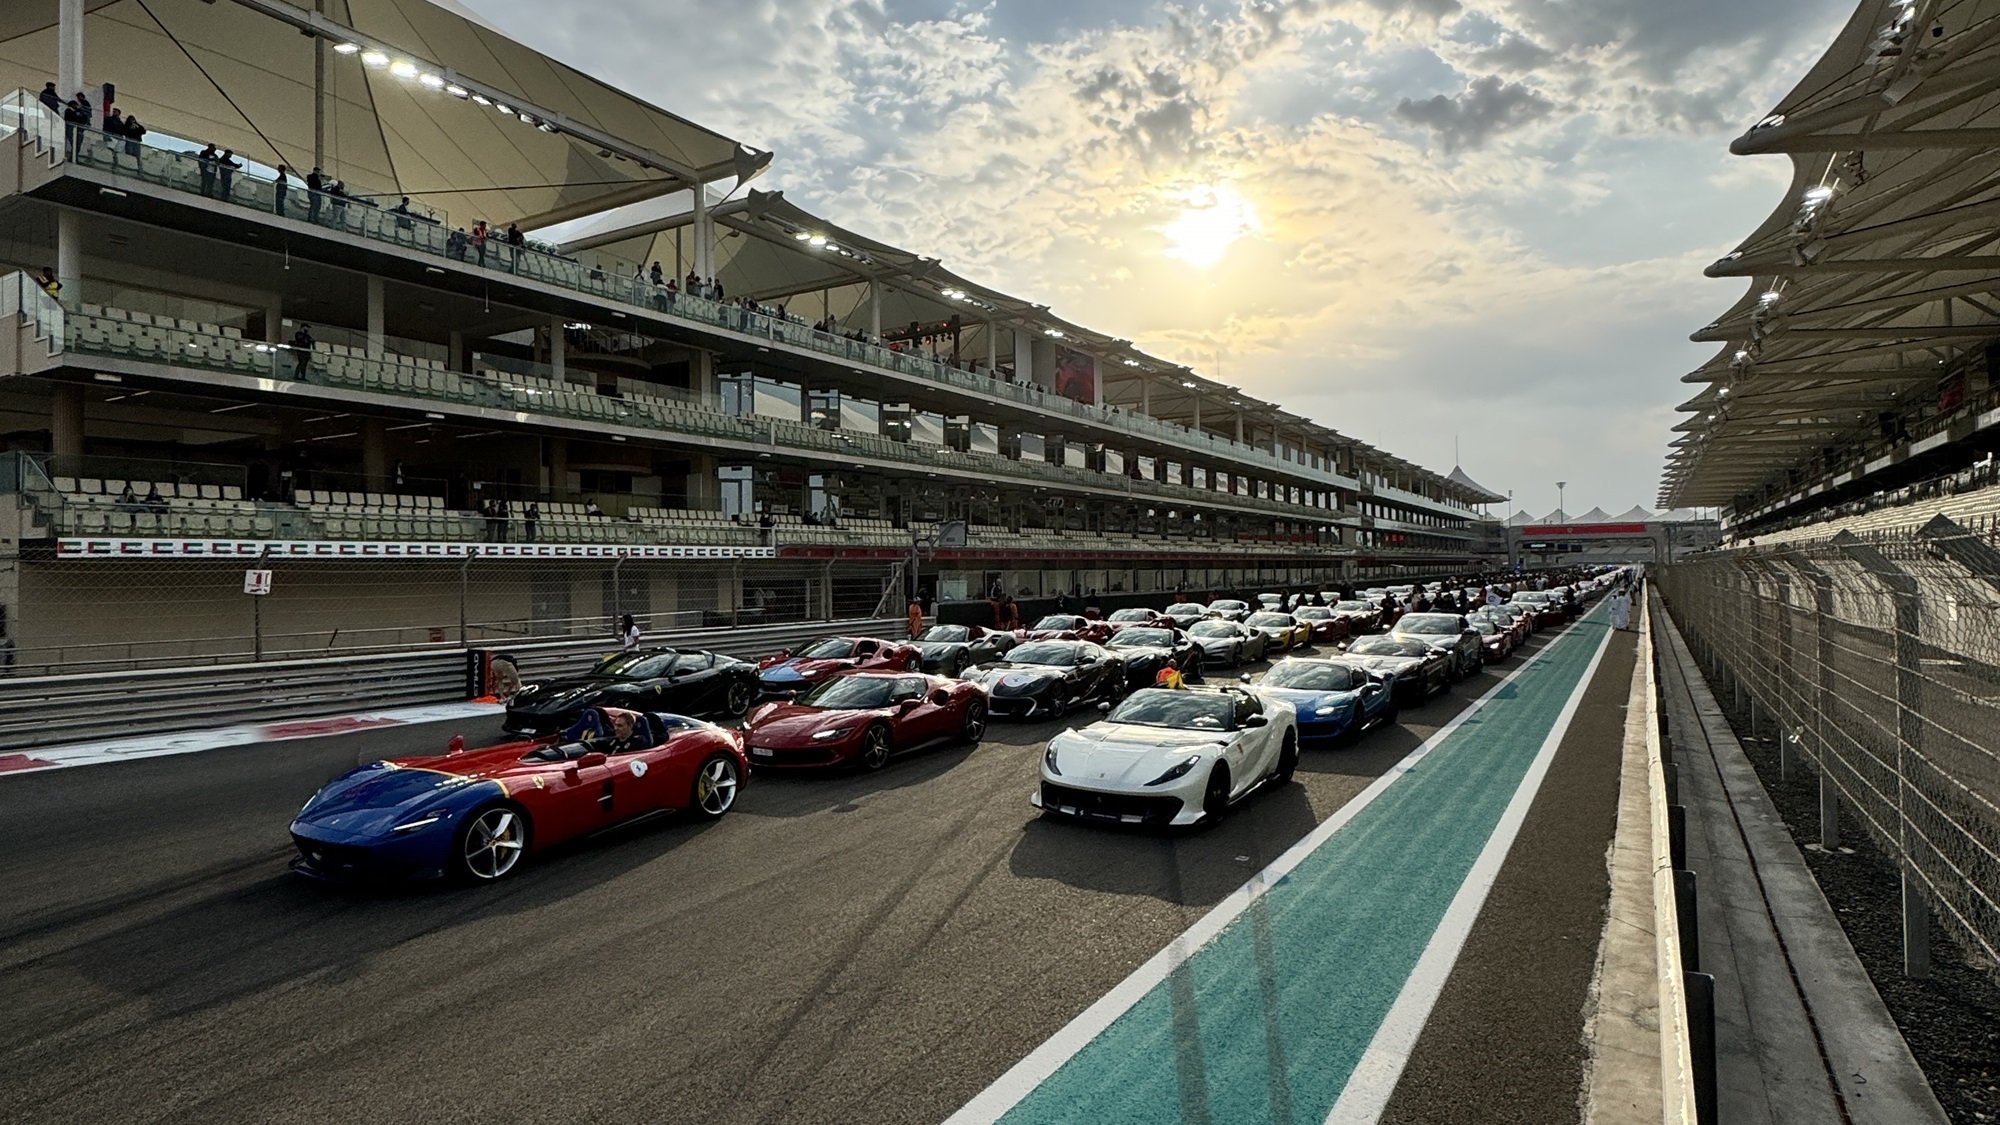 30 Years of Ferrari's presence in the Middle East